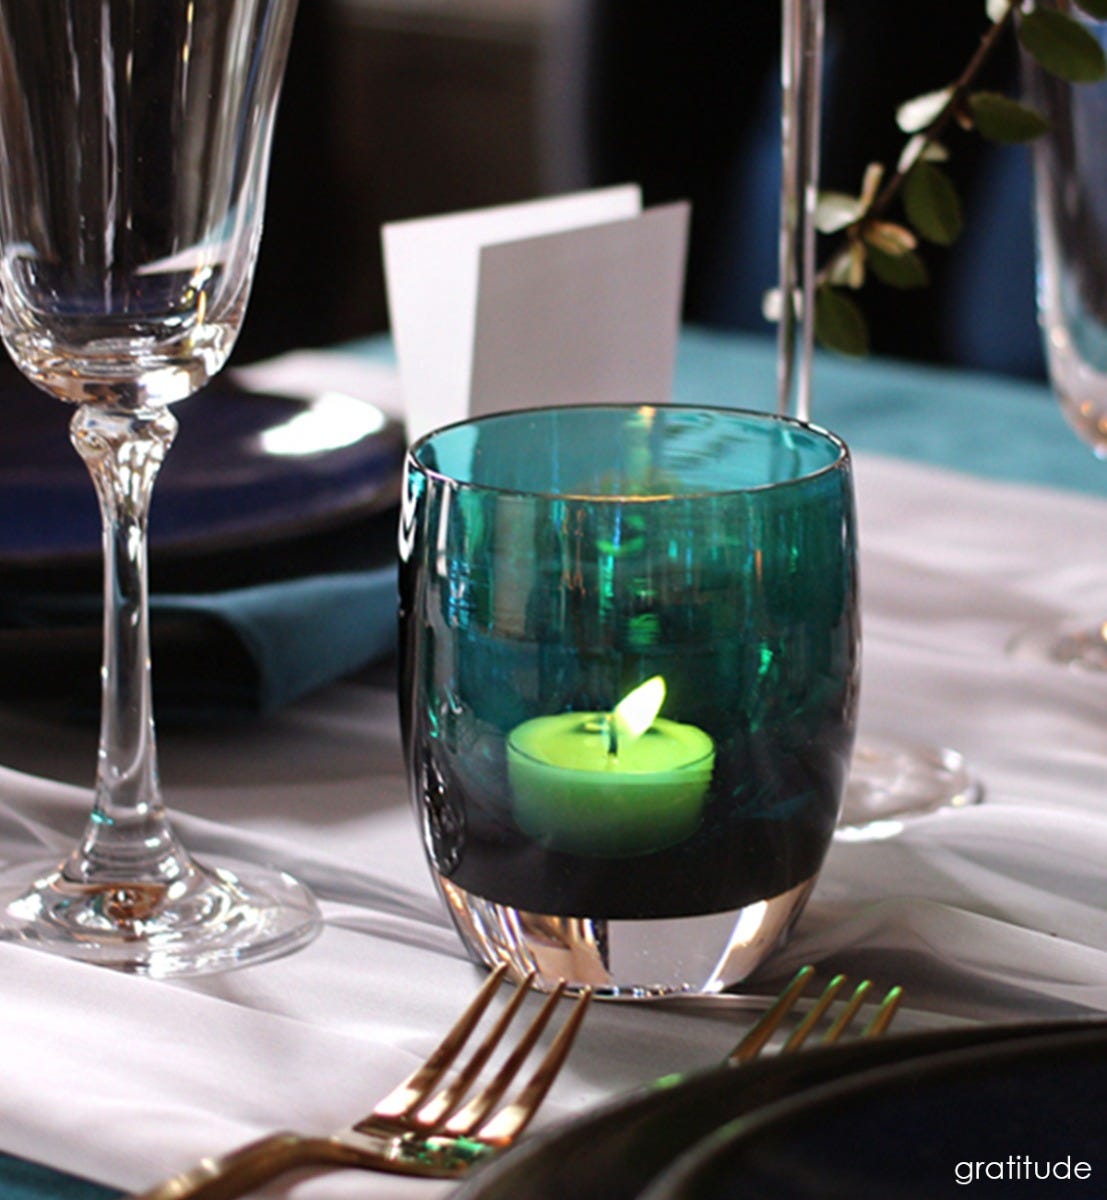 gratitude too, textured translucent teal green with silver luster, hand-blown glass votive candle holder